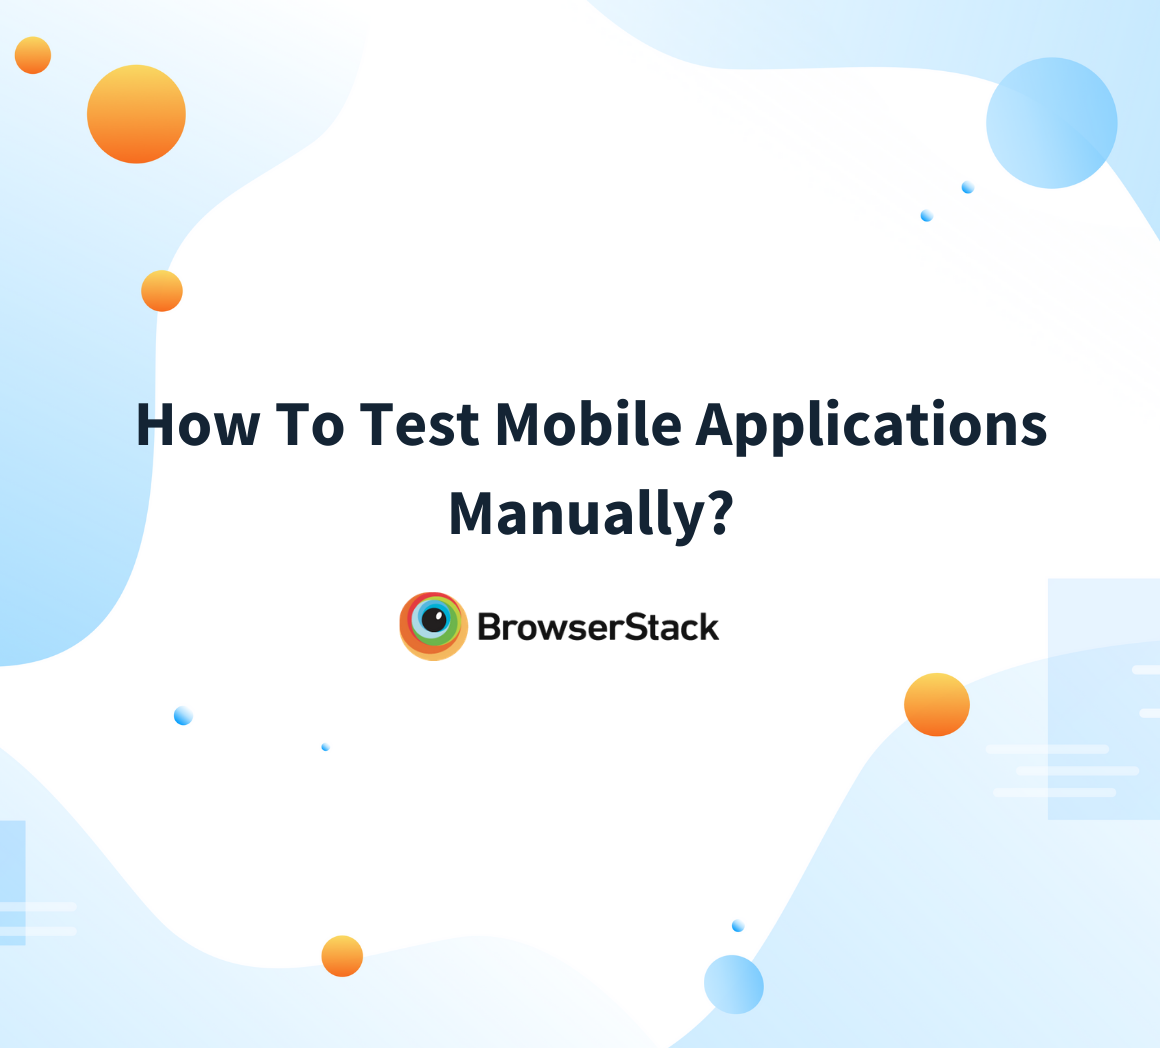 How to Test Mobile Applications Manually